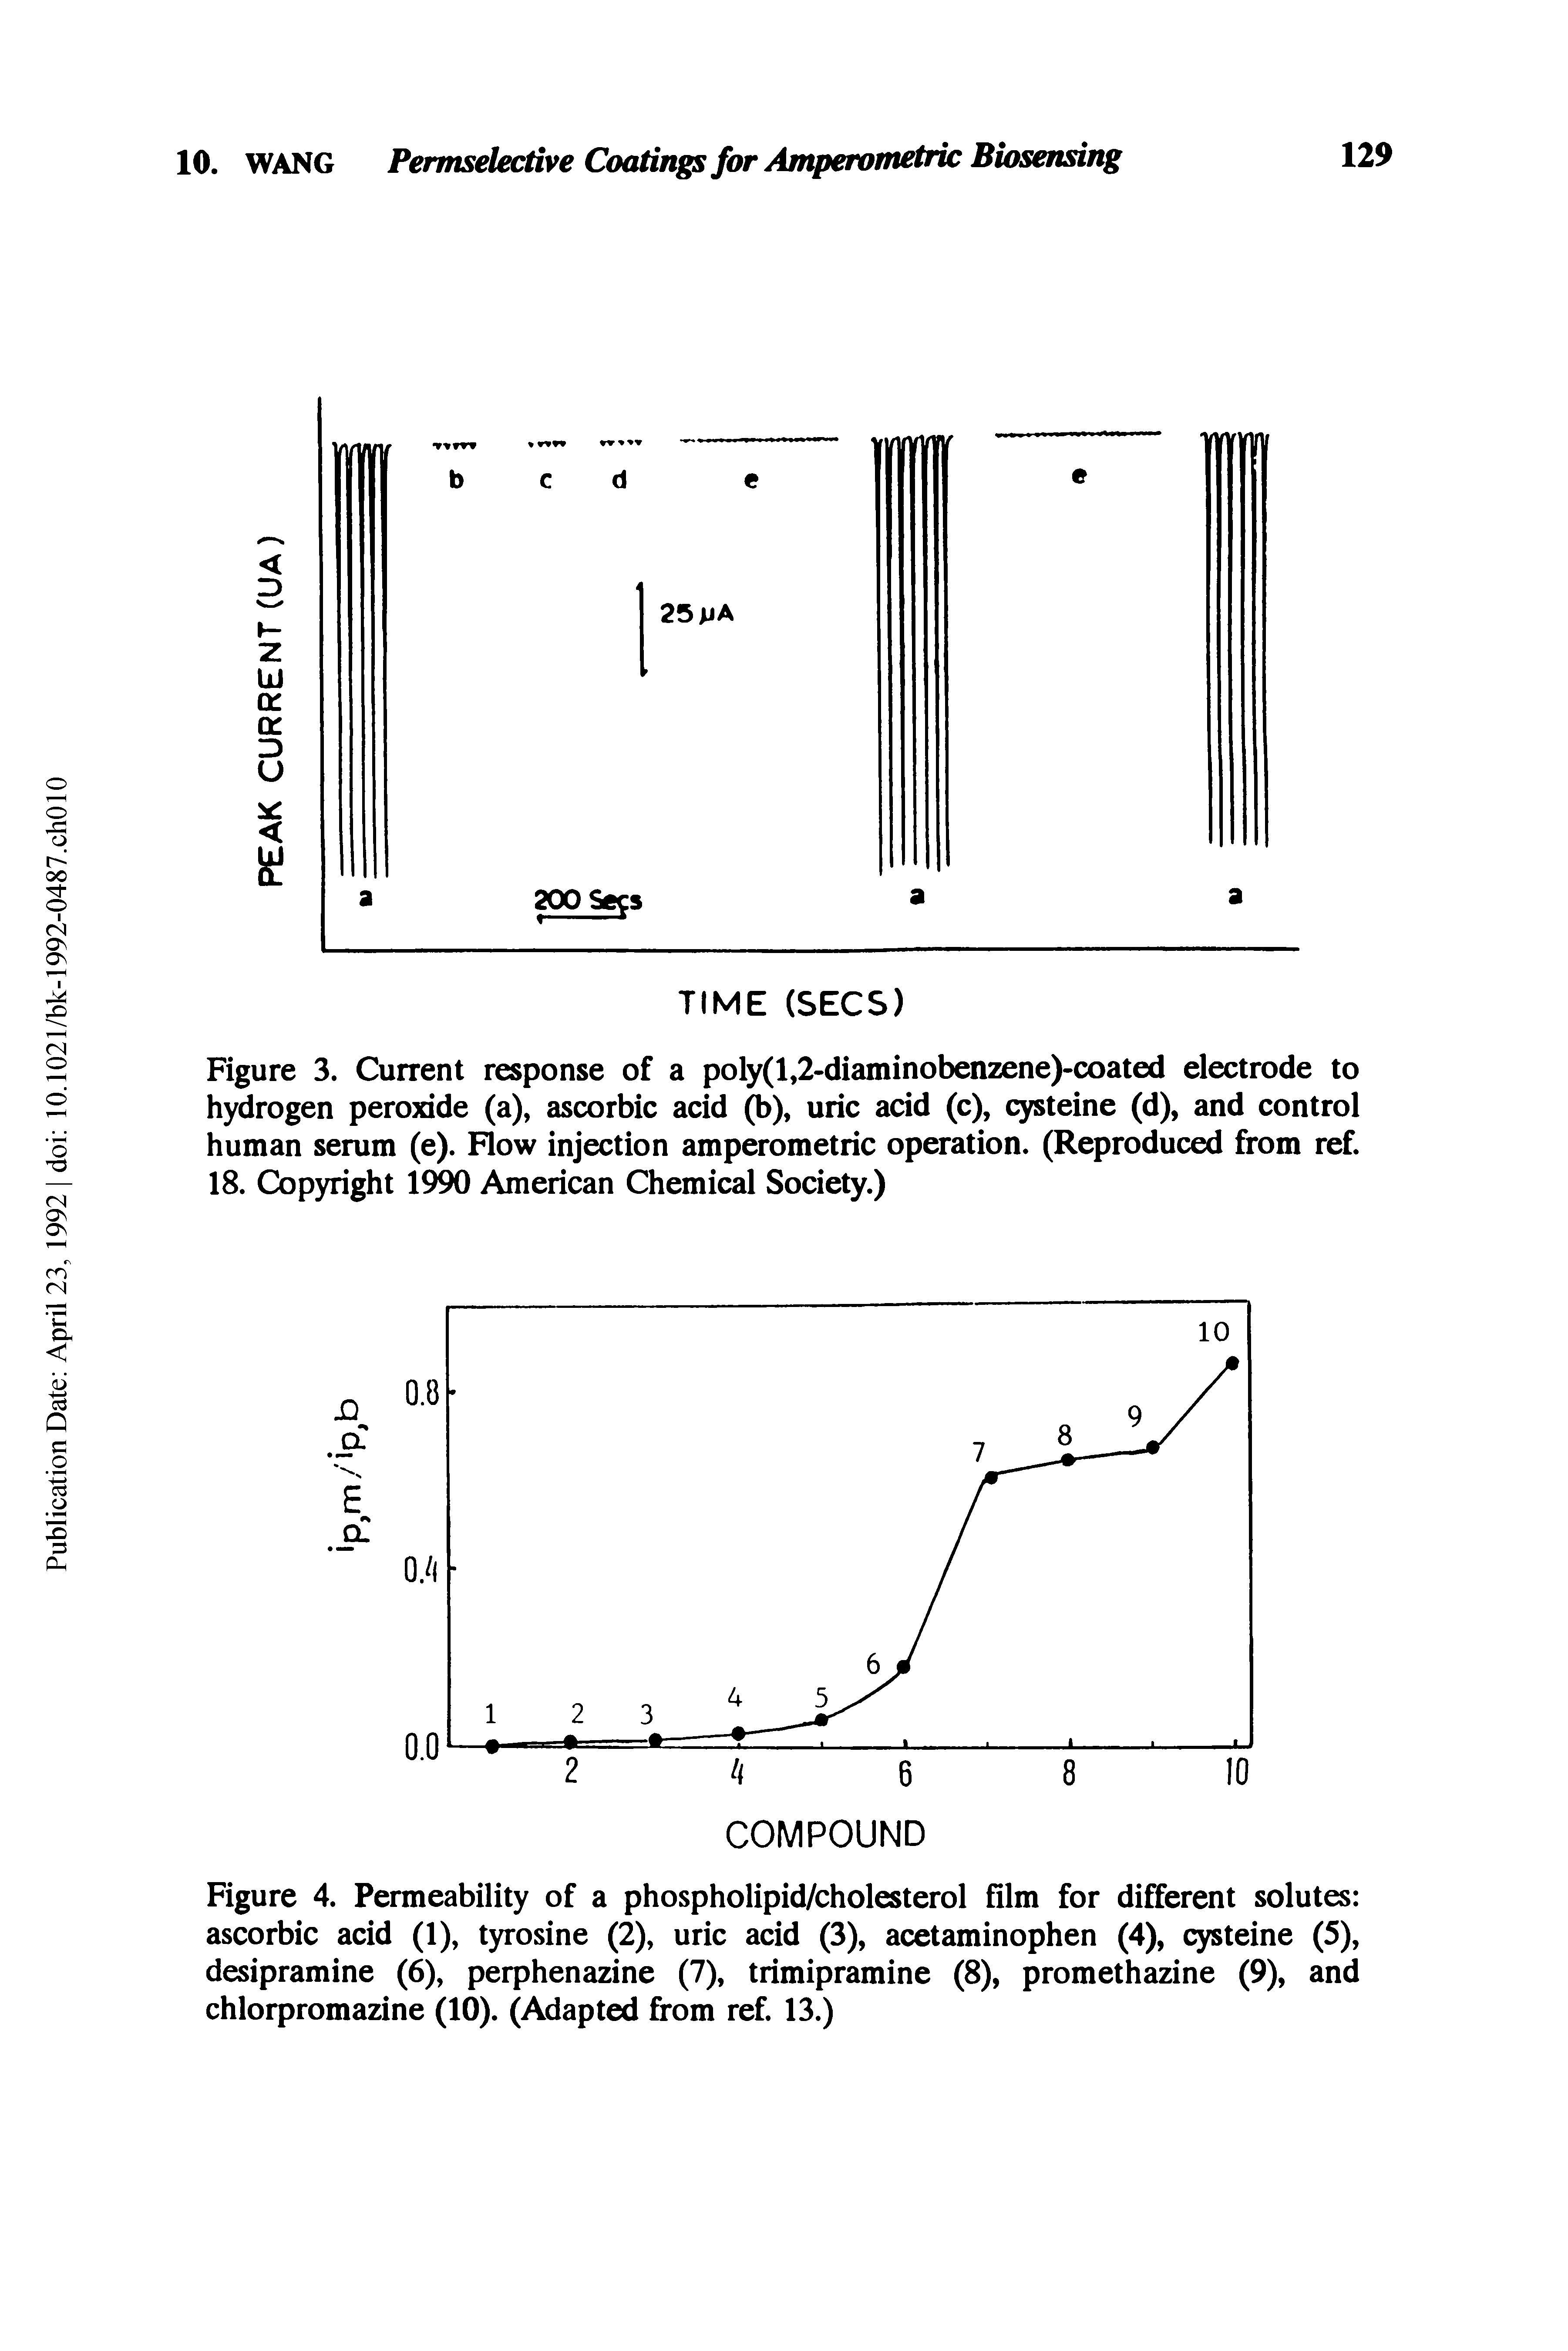 Figure 3. Current response of a poly(l,2-diaminobenzene)-coated electrode to hydrogen peroxide (a), ascorbic acid (b), uric acid (c), cysteine (d), and control human serum (e). Flow injection amperometric operation. (Reproduced from ref. 18. Copyright 1990 American Chemical Society.)...